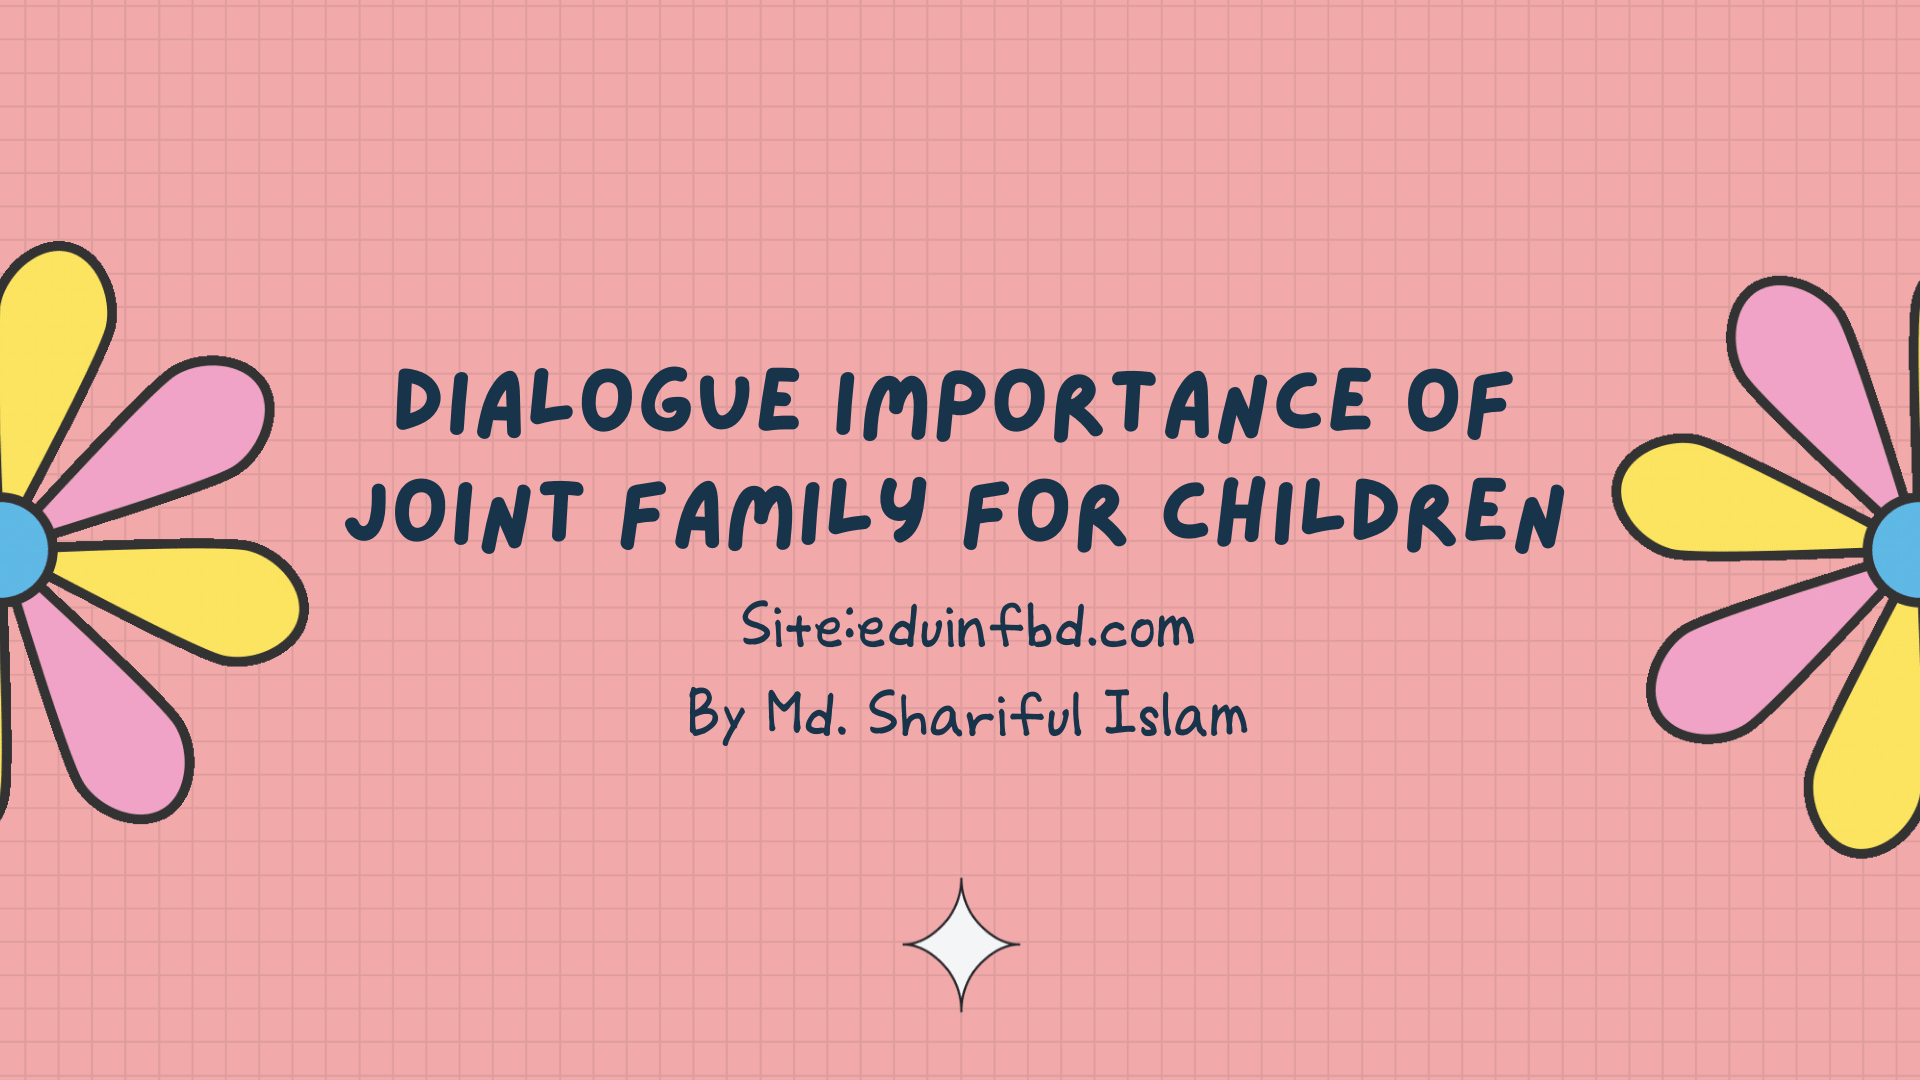 Dialogue importance of joint family for children